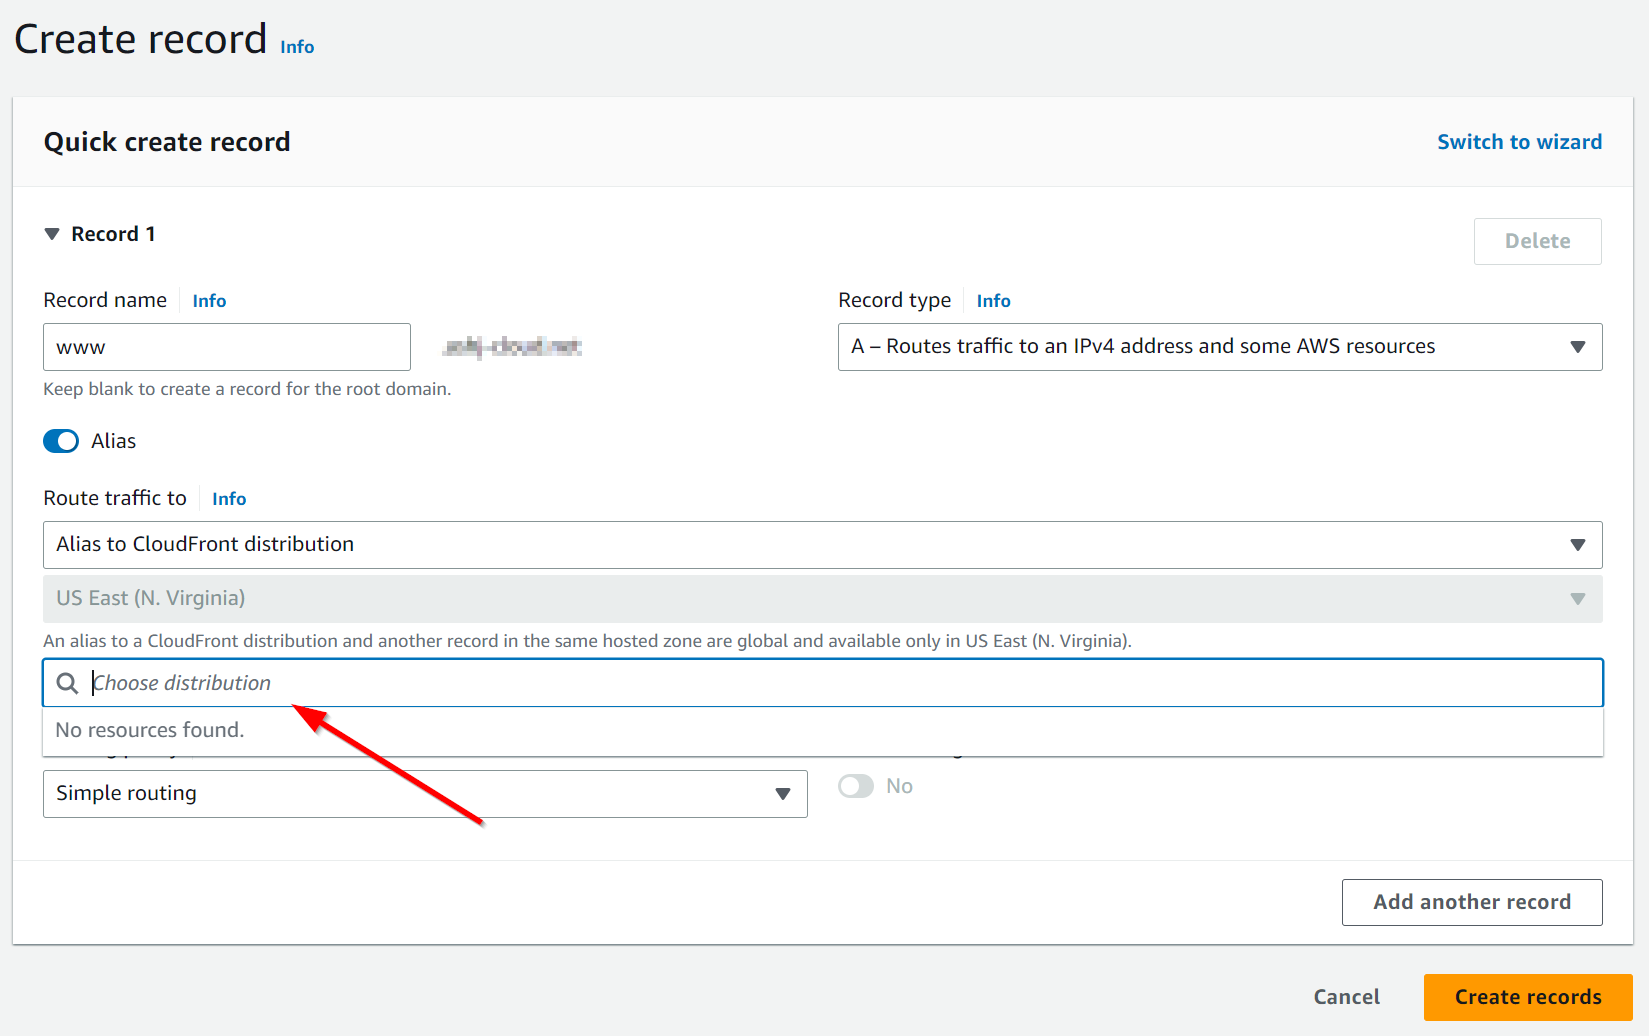 Create A record alias for CloudFront distribution